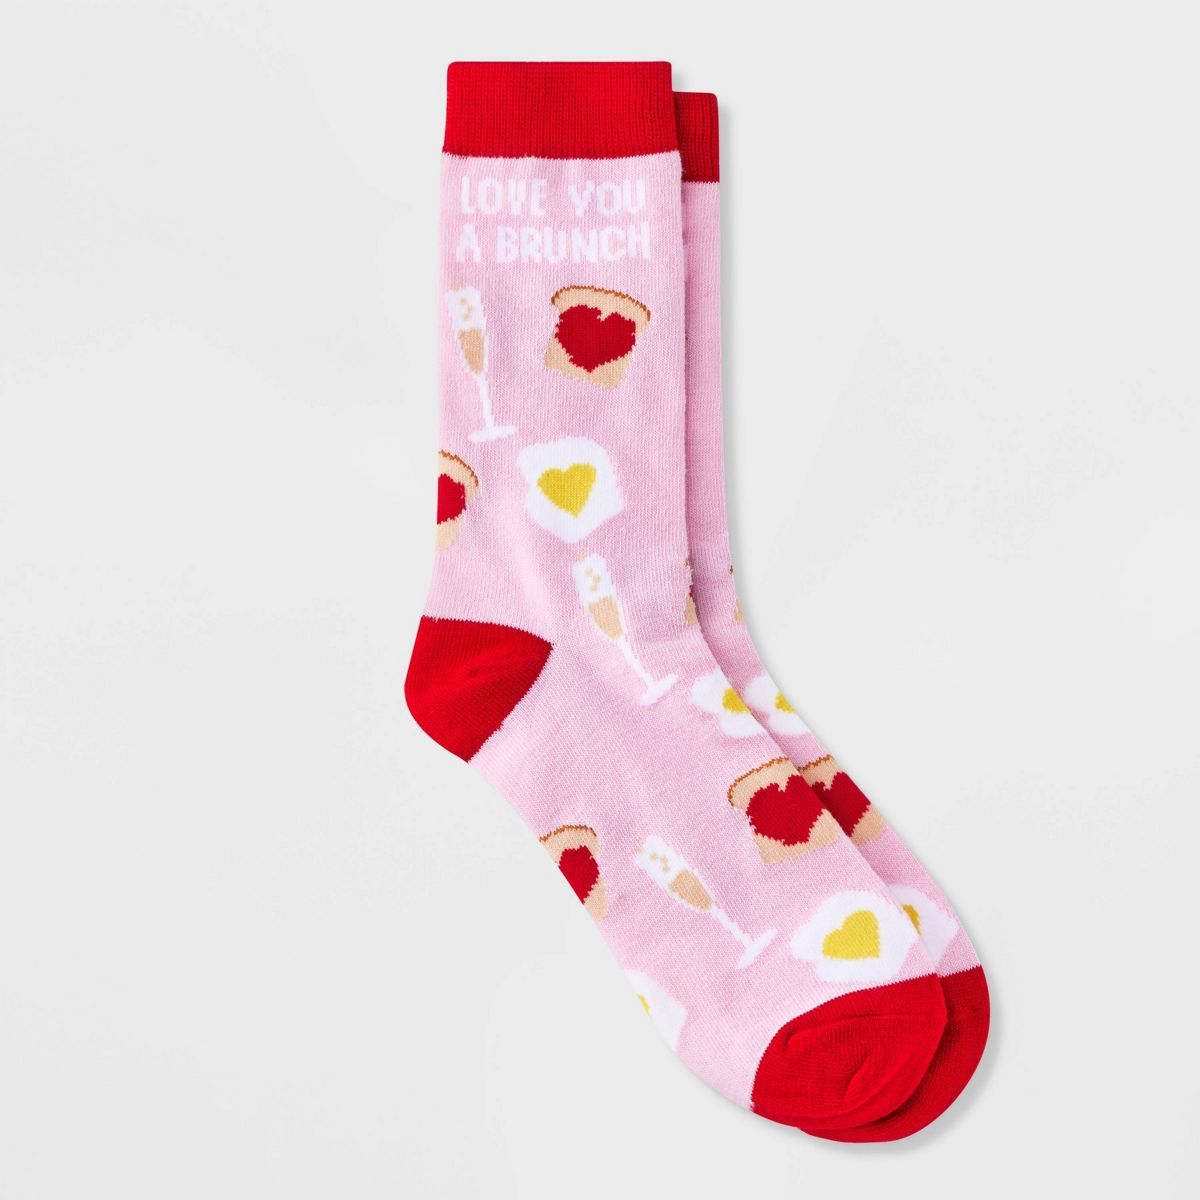 Women's 'Love You a Brunch' Valentine's Day Crew Socks - Pink/Red 4-10 | Target